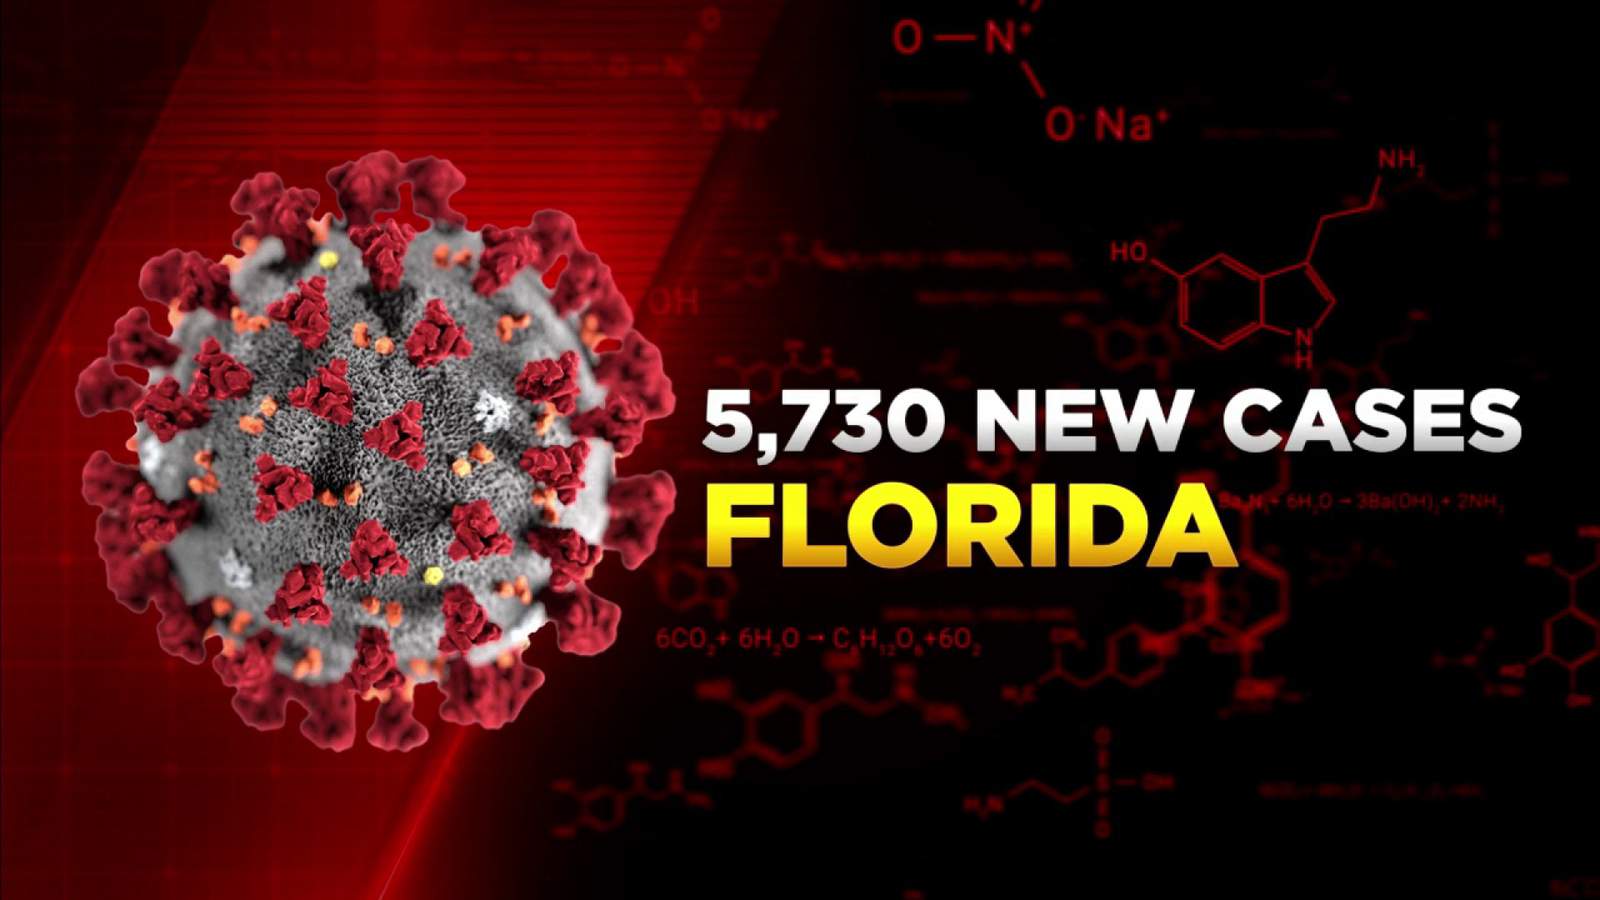 Florida reported 5,730 new cases of coronavirus on Monday, 206 deaths of residents